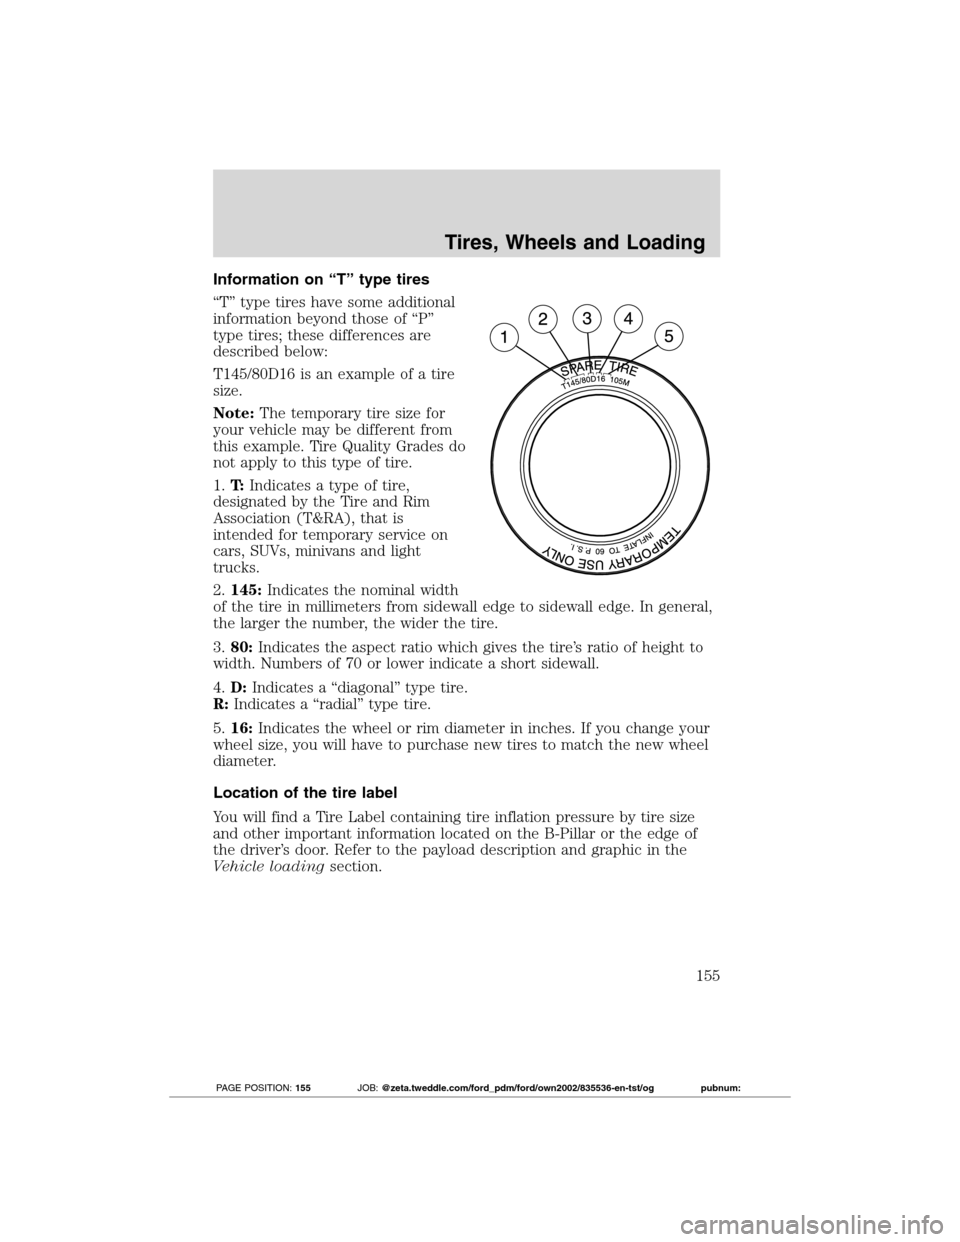 FORD TRANSIT CONNECT 2012 1.G Owners Manual Information on “T” type tires
“T” type tires have some additional
information beyond those of “P”
type tires; these differences are
described below:
T145/80D16 is an example of a tire
size